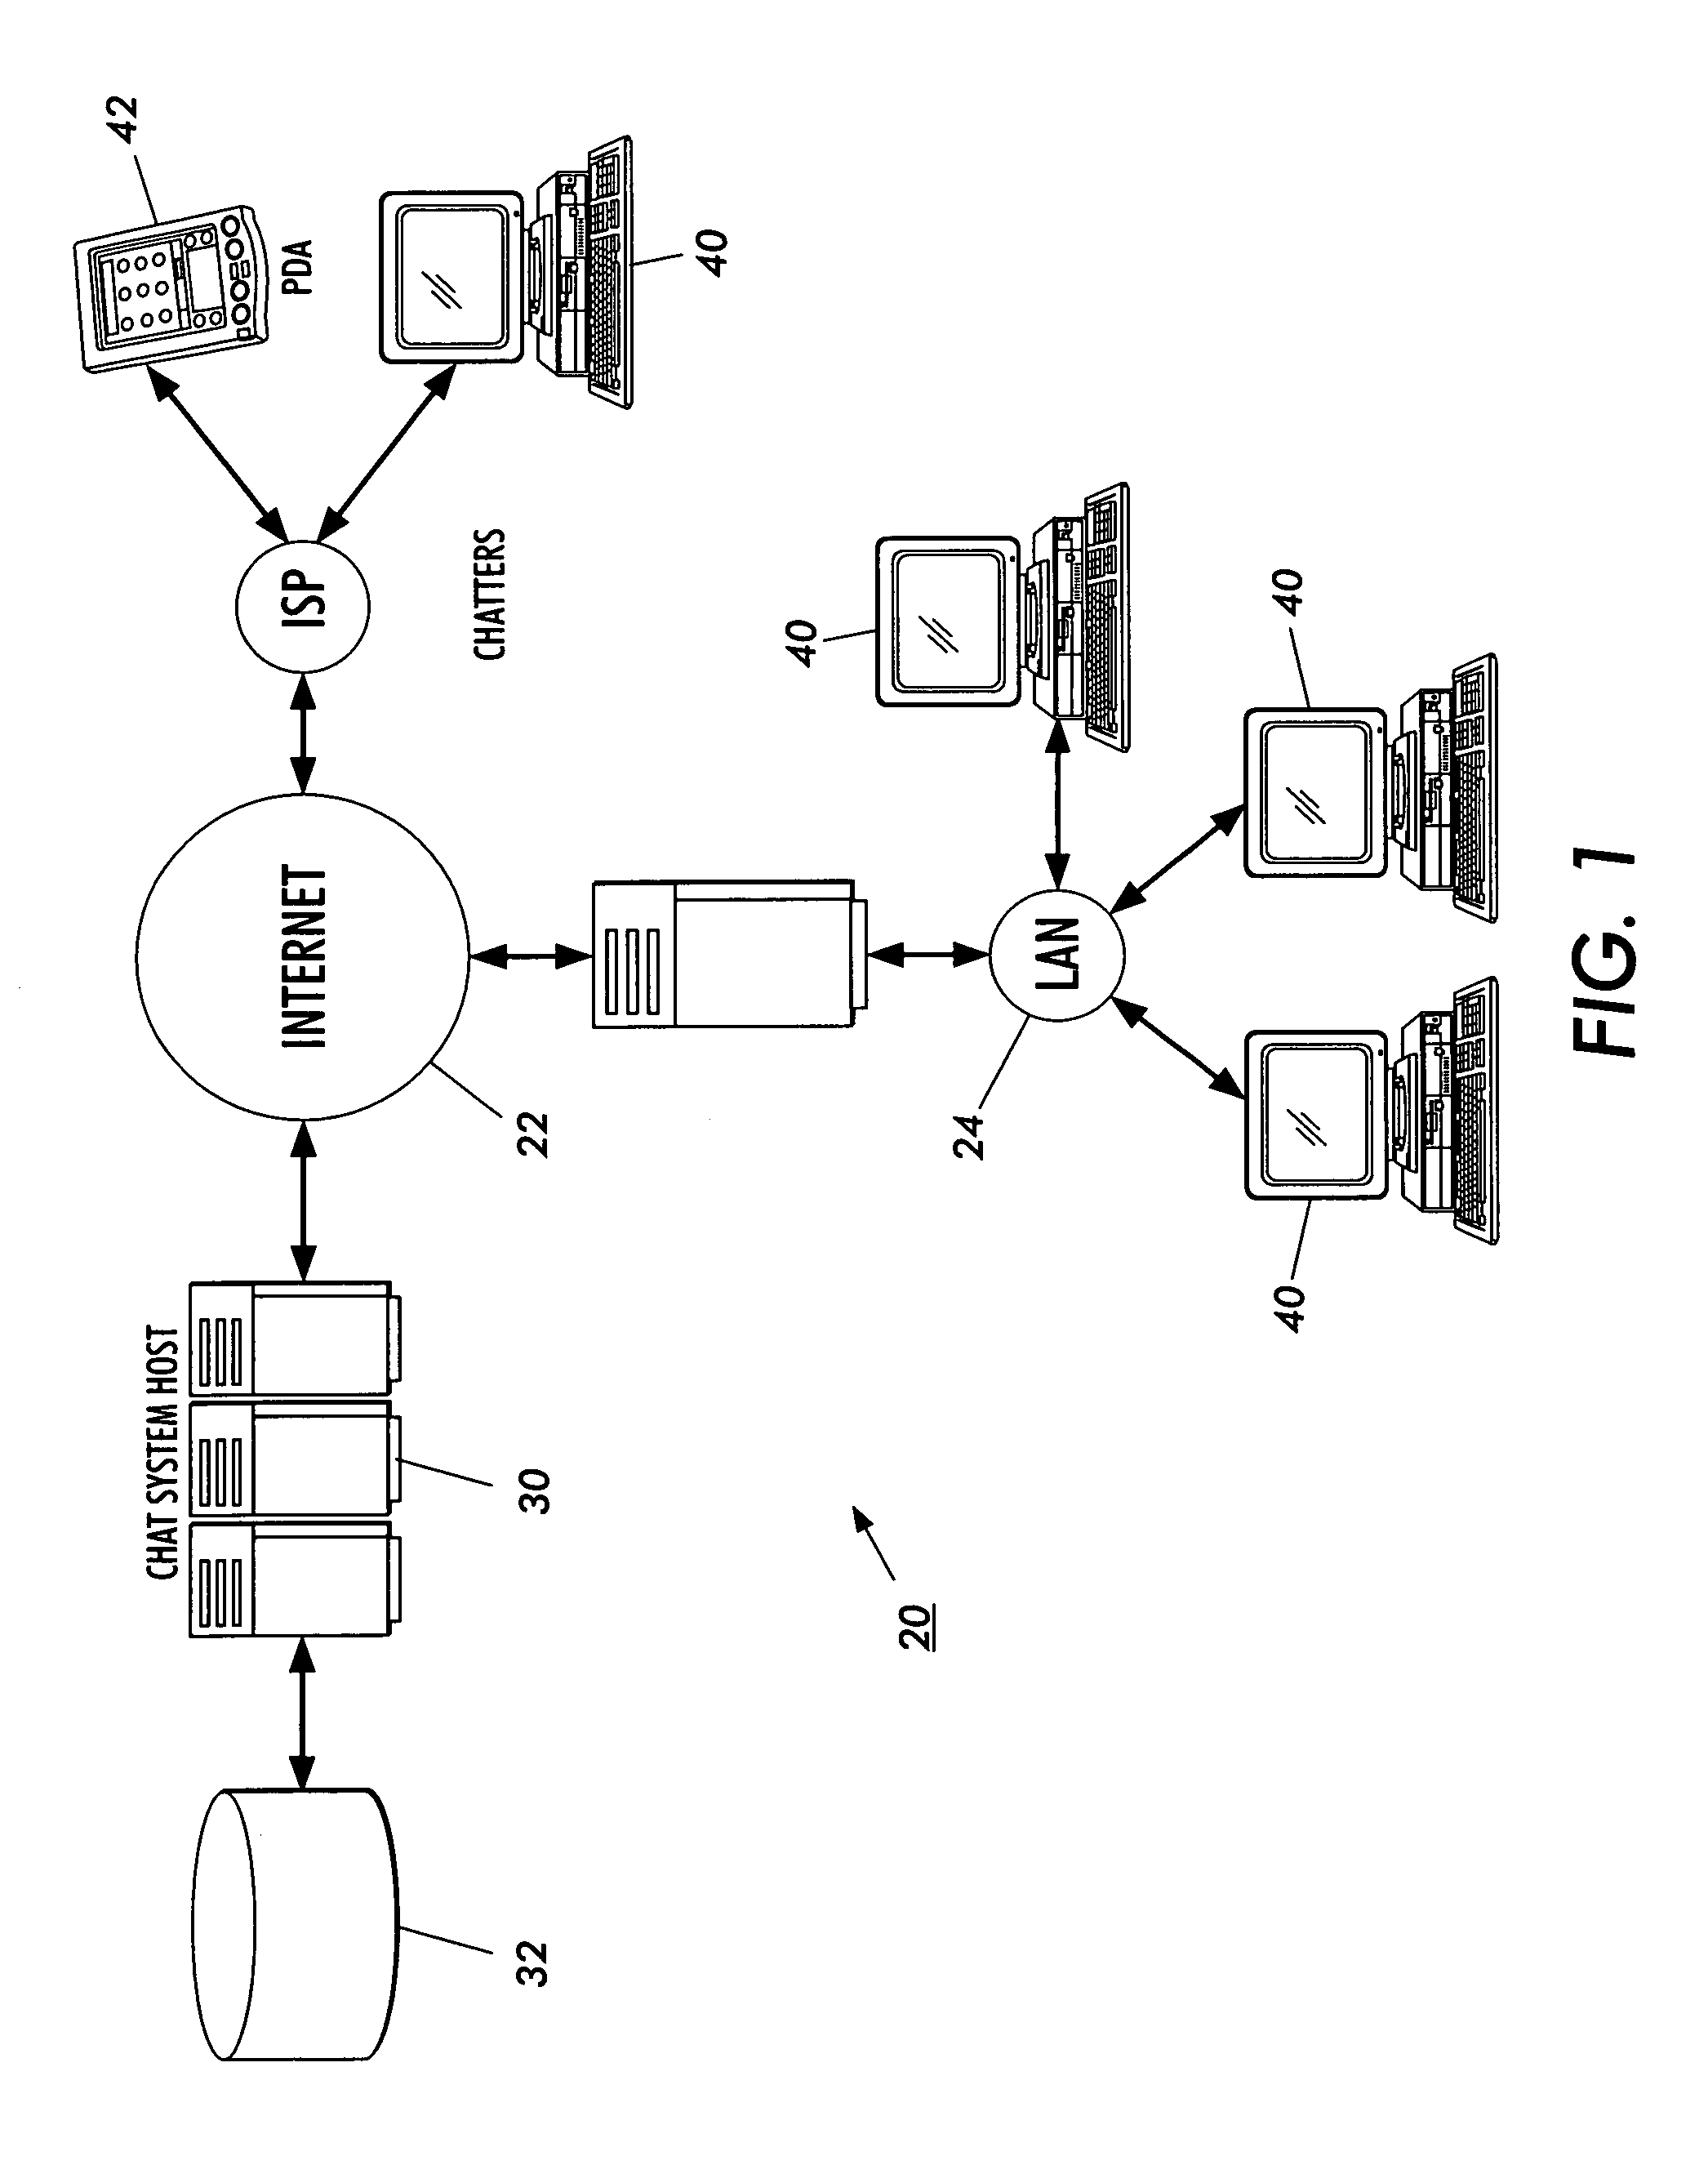 System and method for the automated notification of compatibility between real-time network participants